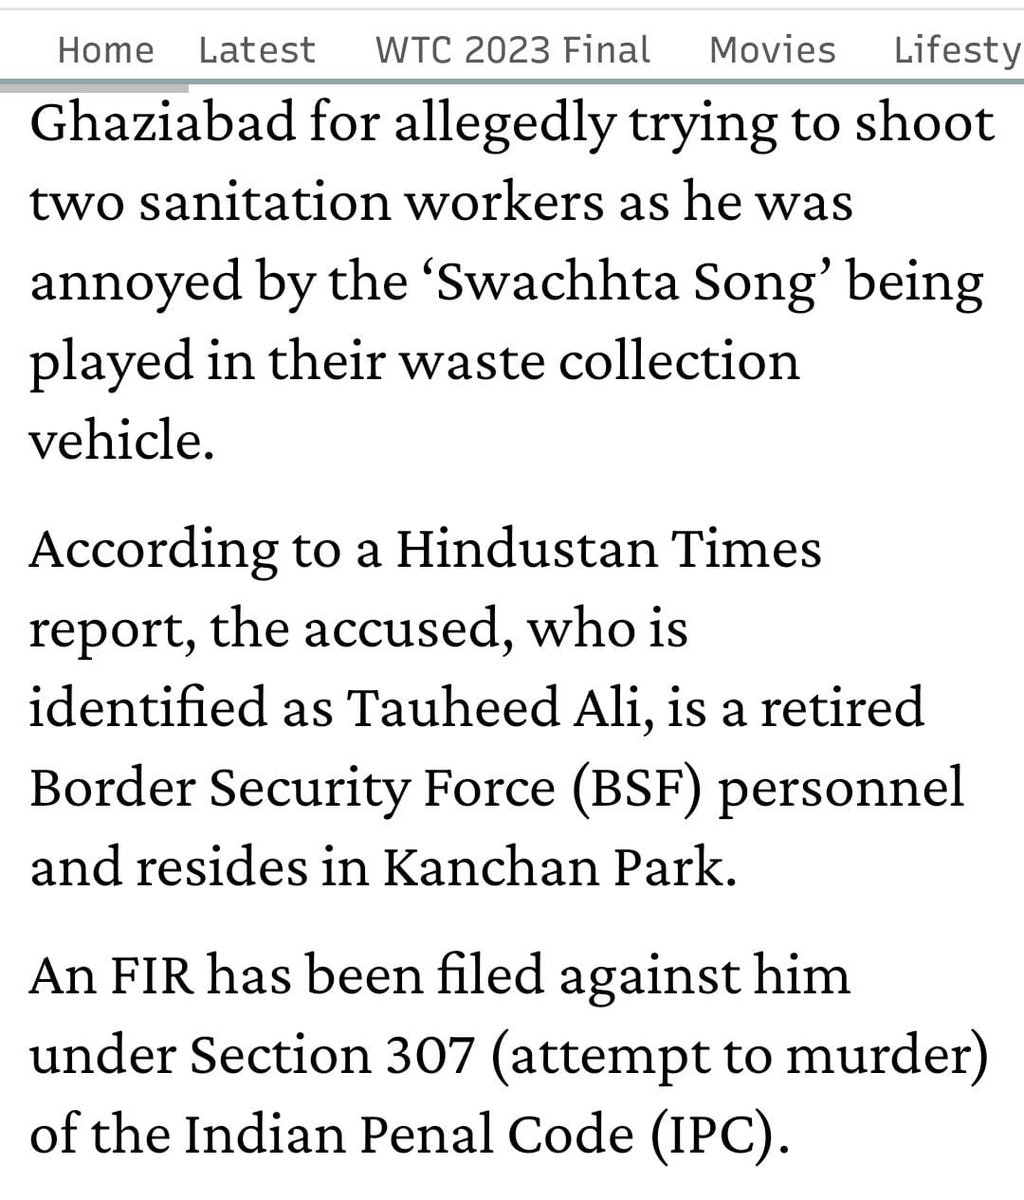 Ghaziabad Uttar Pradesh

Tauheed Ali shoots sanitation workers for playing the Swachhta Anthem while picking up waste. According to reports, Tauheed was irritated by the loudspeaker, which disrupted his sleep.

In this regard, a case has been filed under Section 307 of the IPC.